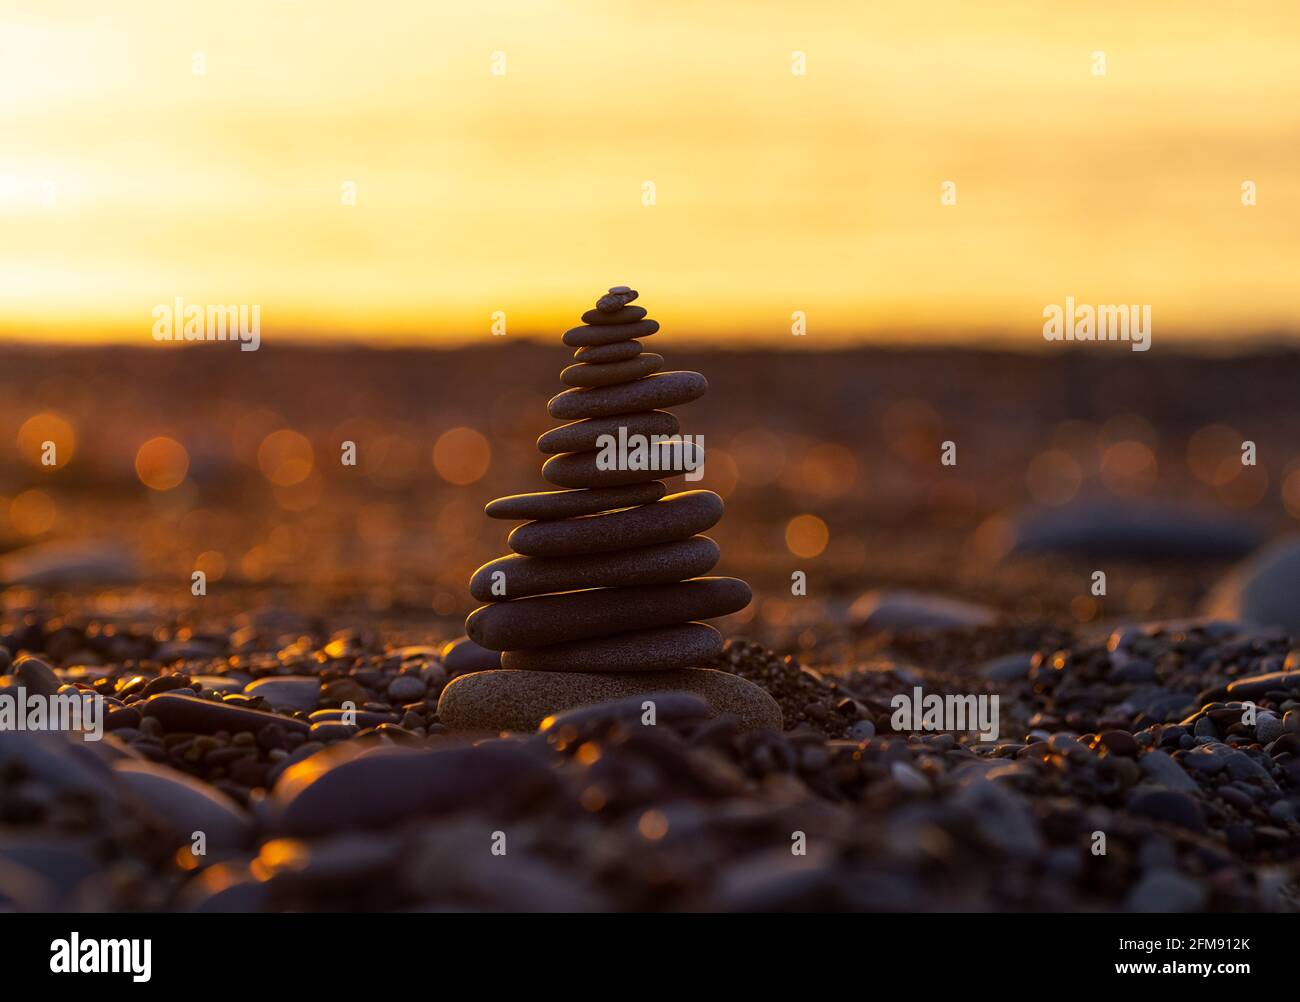 Pyramid of Stones on the Beach at Sunset, Beautiful Seascape, Seaside vacation concept, Panoramic Background, Balance Composition, Copyspace Stock Photo